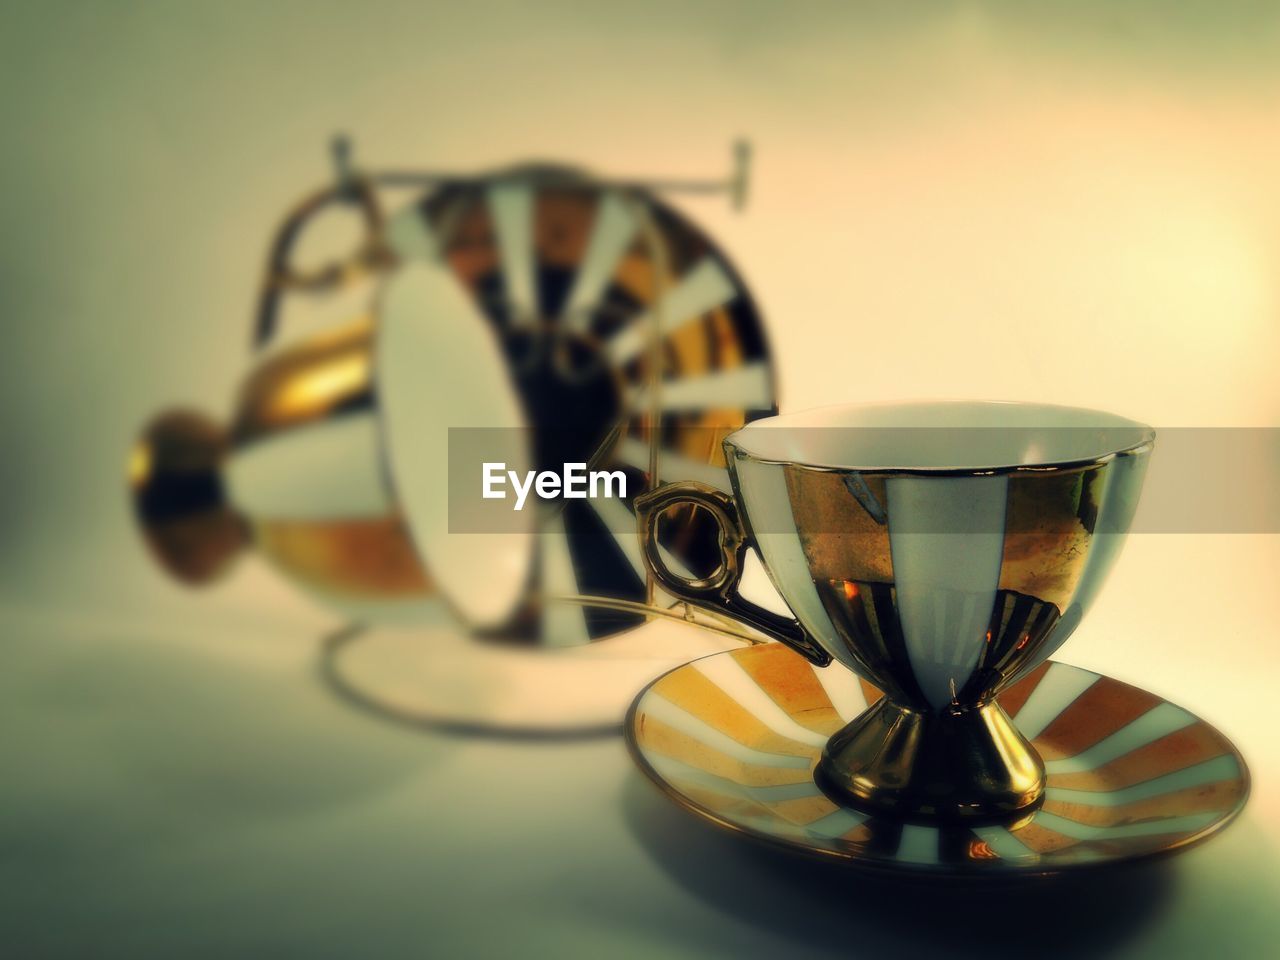 Close up of coffee cup with saucer on table